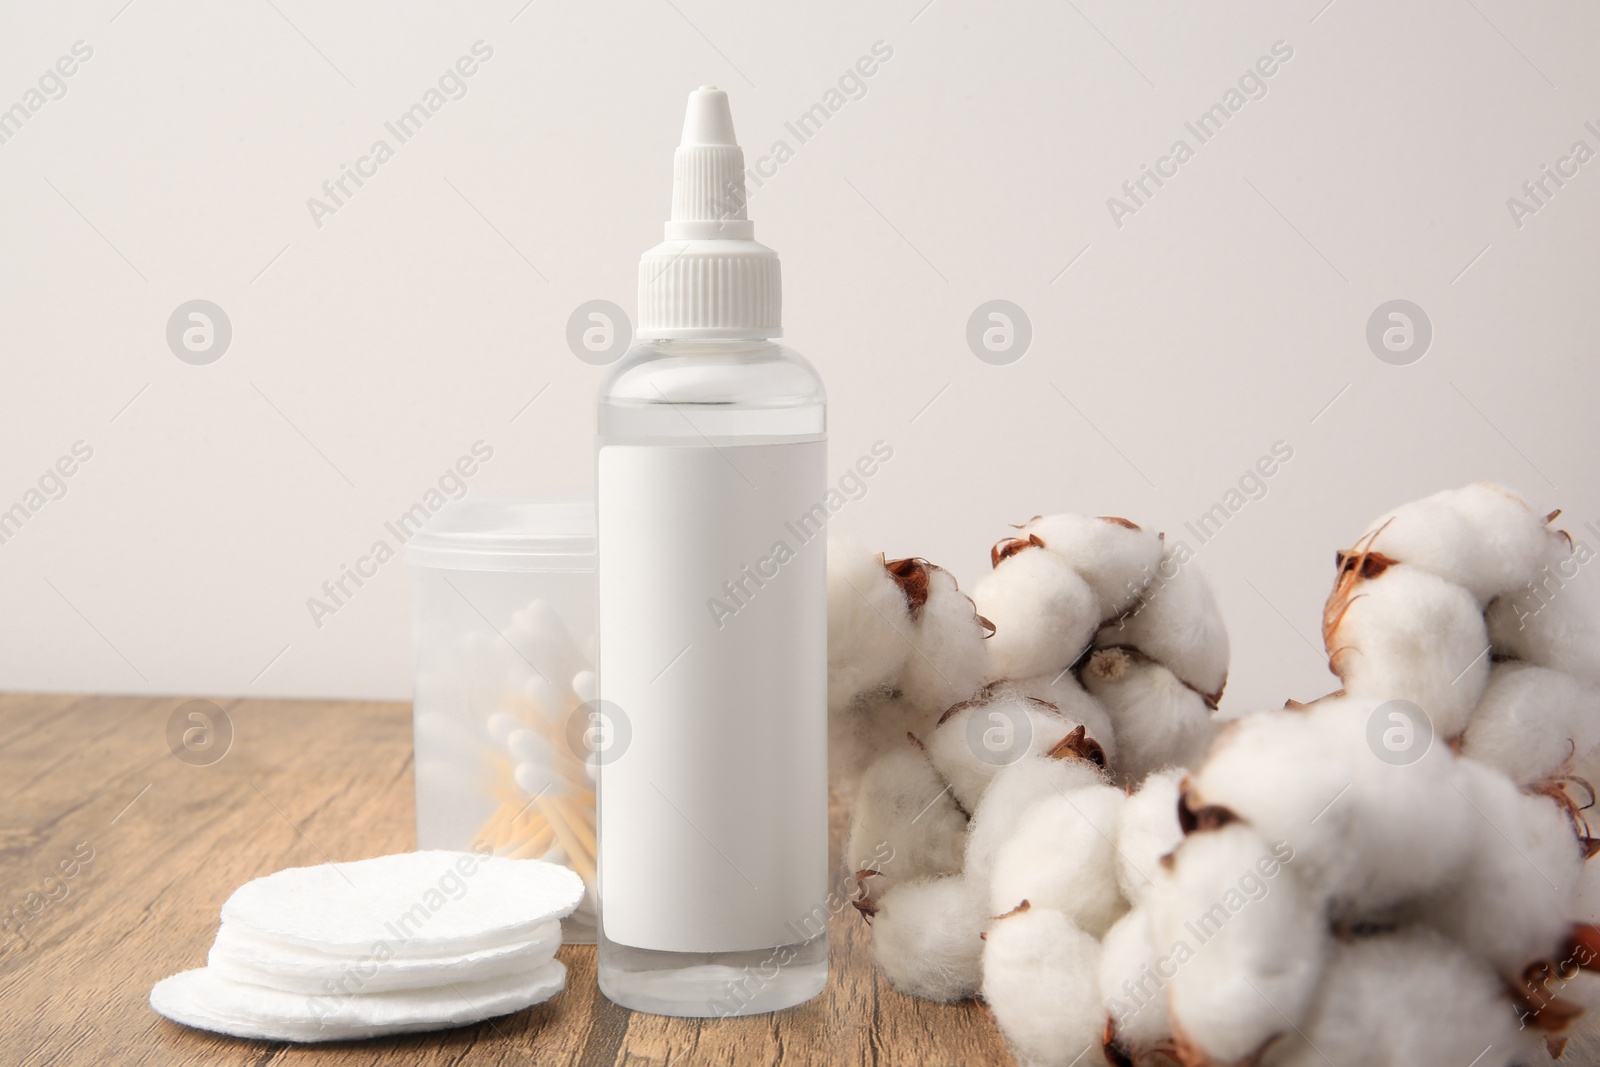 Photo of Composition with makeup remover and cotton flowers on wooden table against white background